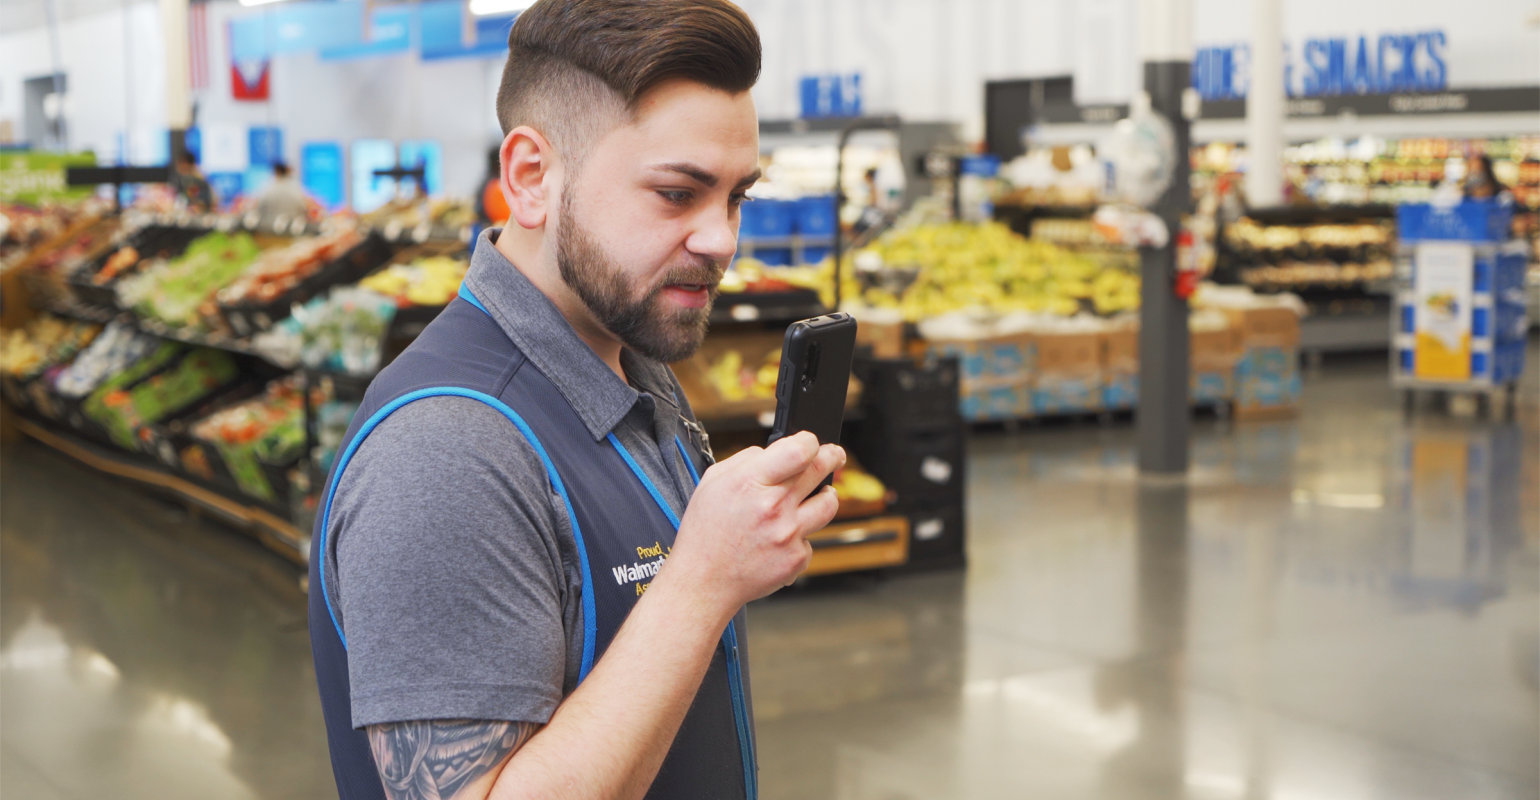 Walmart Aims To Retain Affluent Shoppers With Newly Revamped Stores